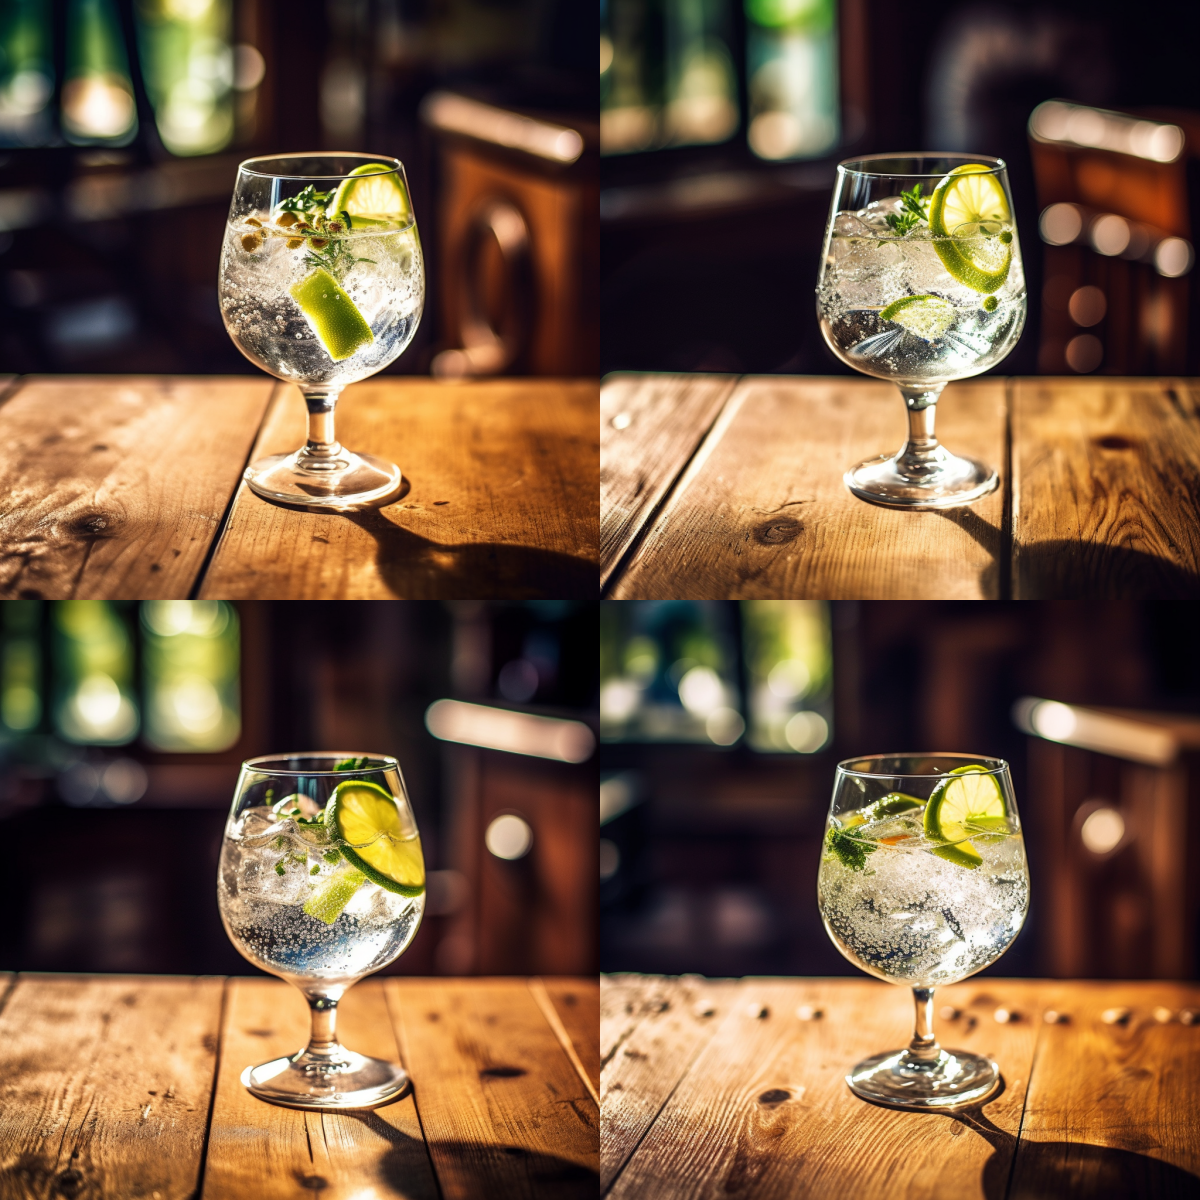 Senwater_gin_tonic_on_wooden_table_wood_wall_background_refresh_6d743bfd-4299-4a89-ad5d-7c1b2334678c